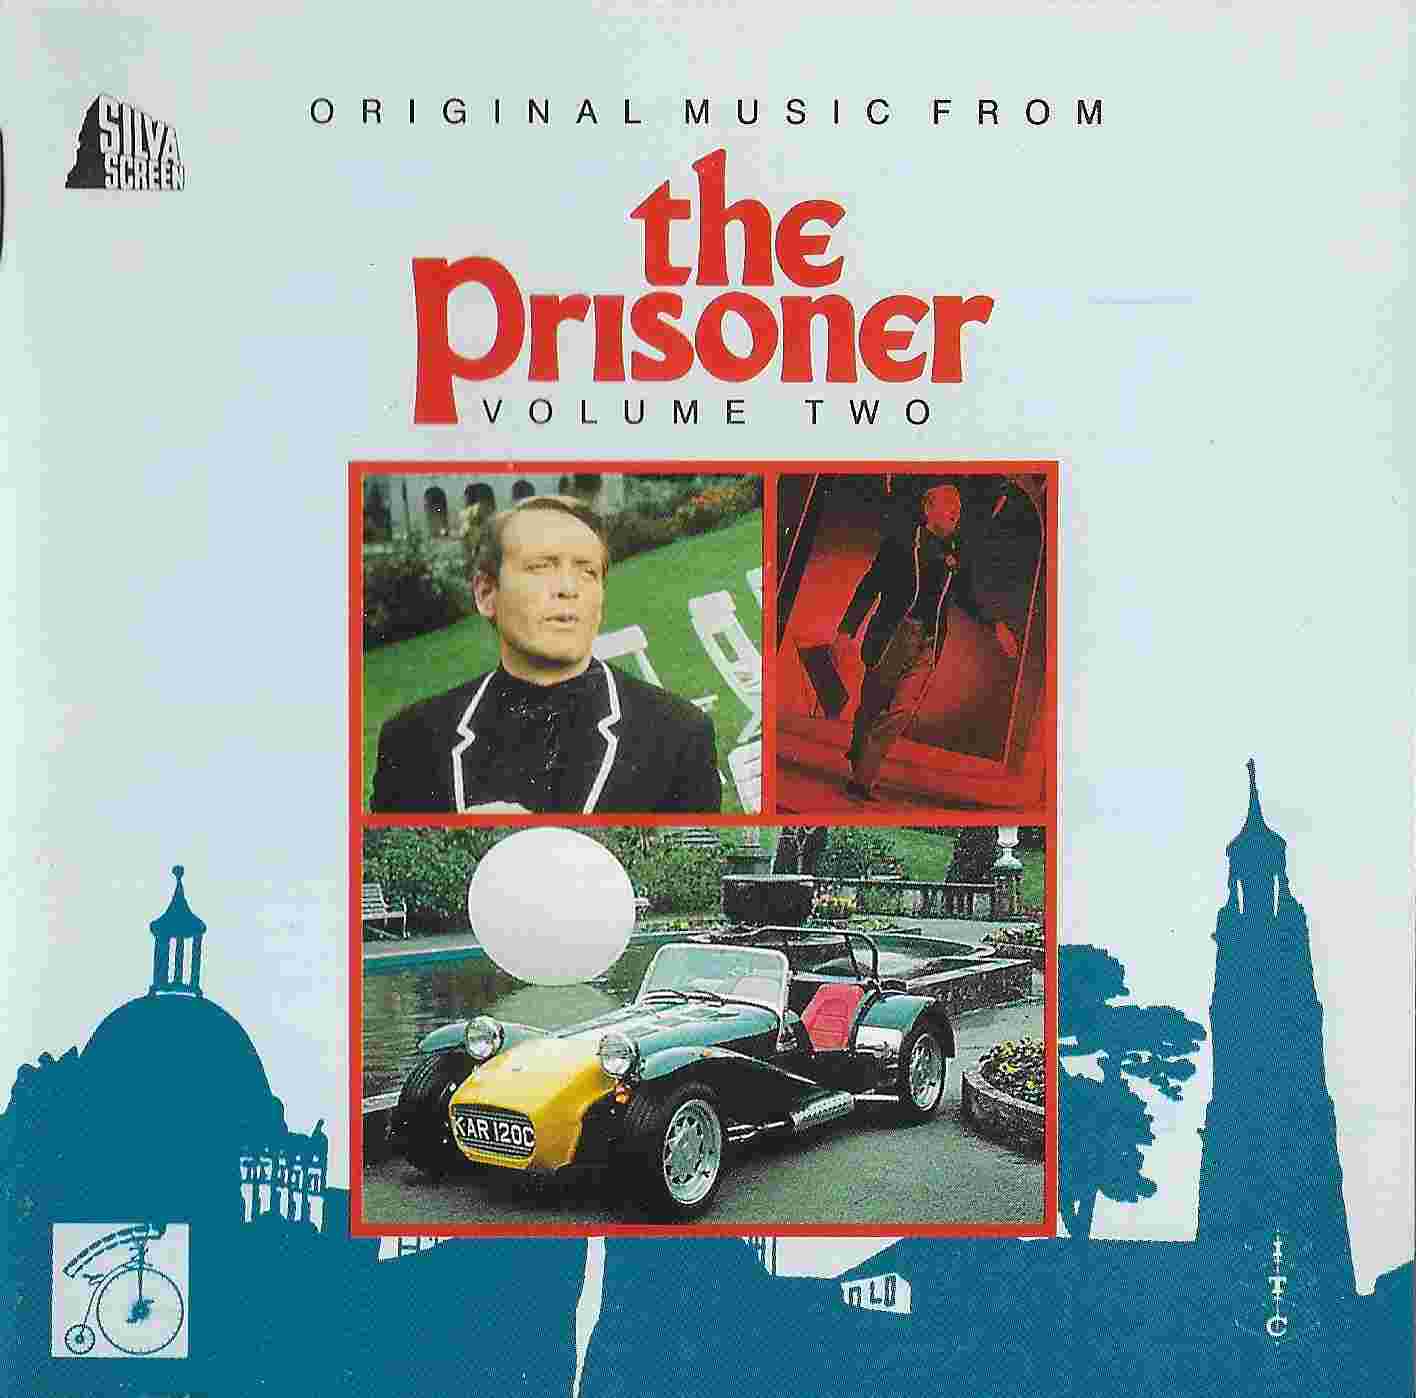 Picture of FILMCD 084 The prisoner - Volume 2 by artist Various from ITV, Channel 4 and Channel 5 library